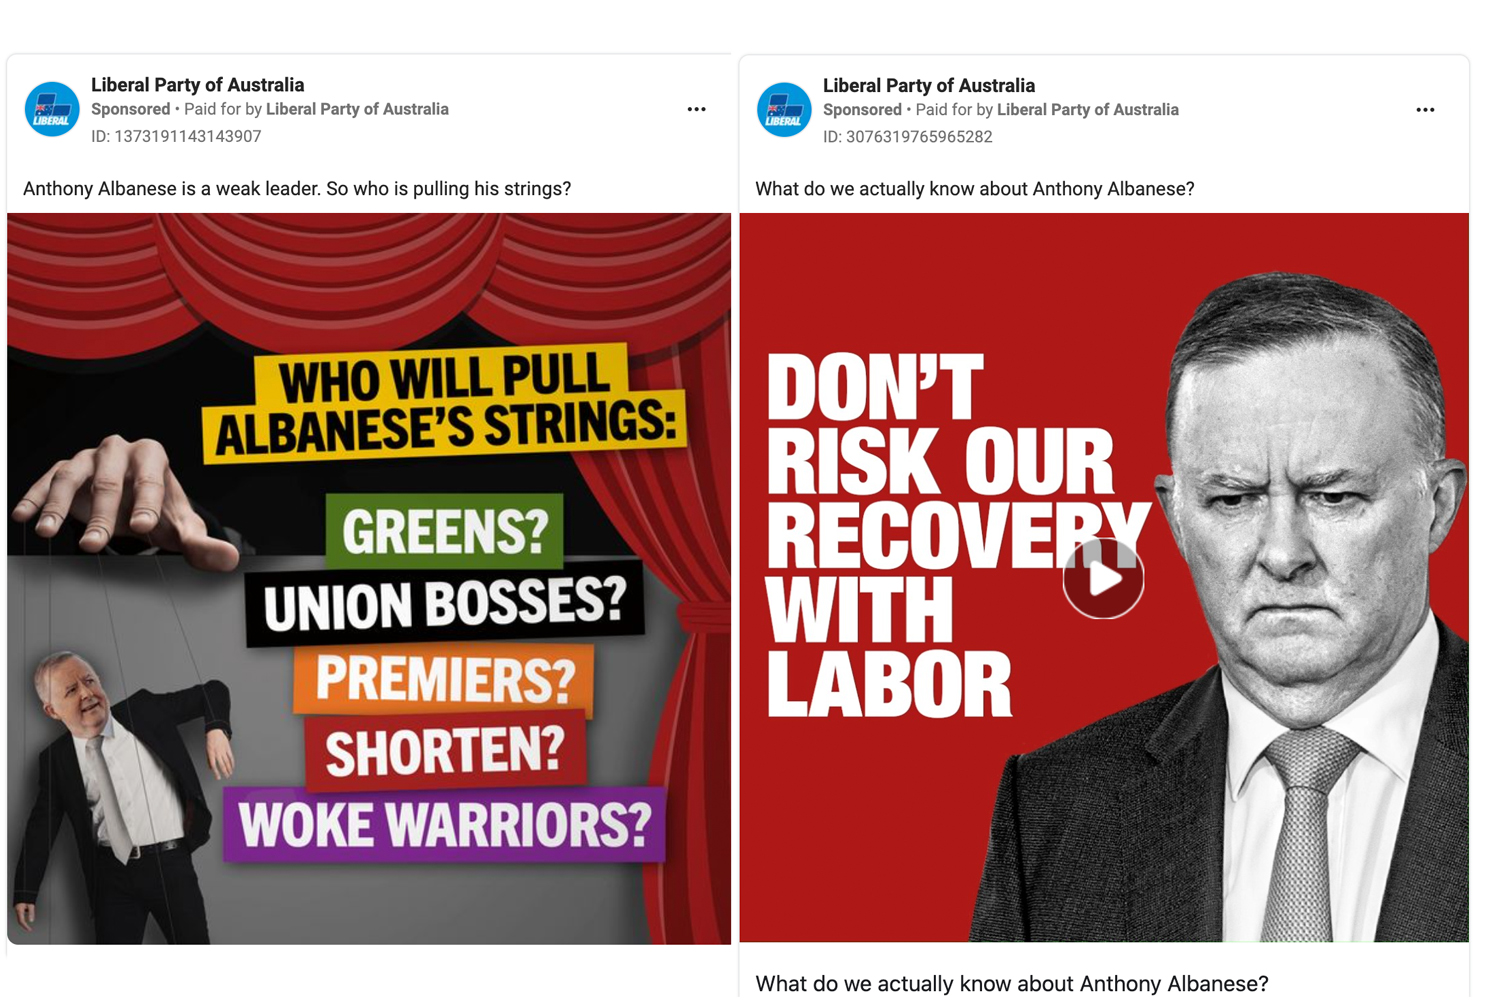 Screenshots of two side by side Facebook ads featuring images of Anthony Albanese